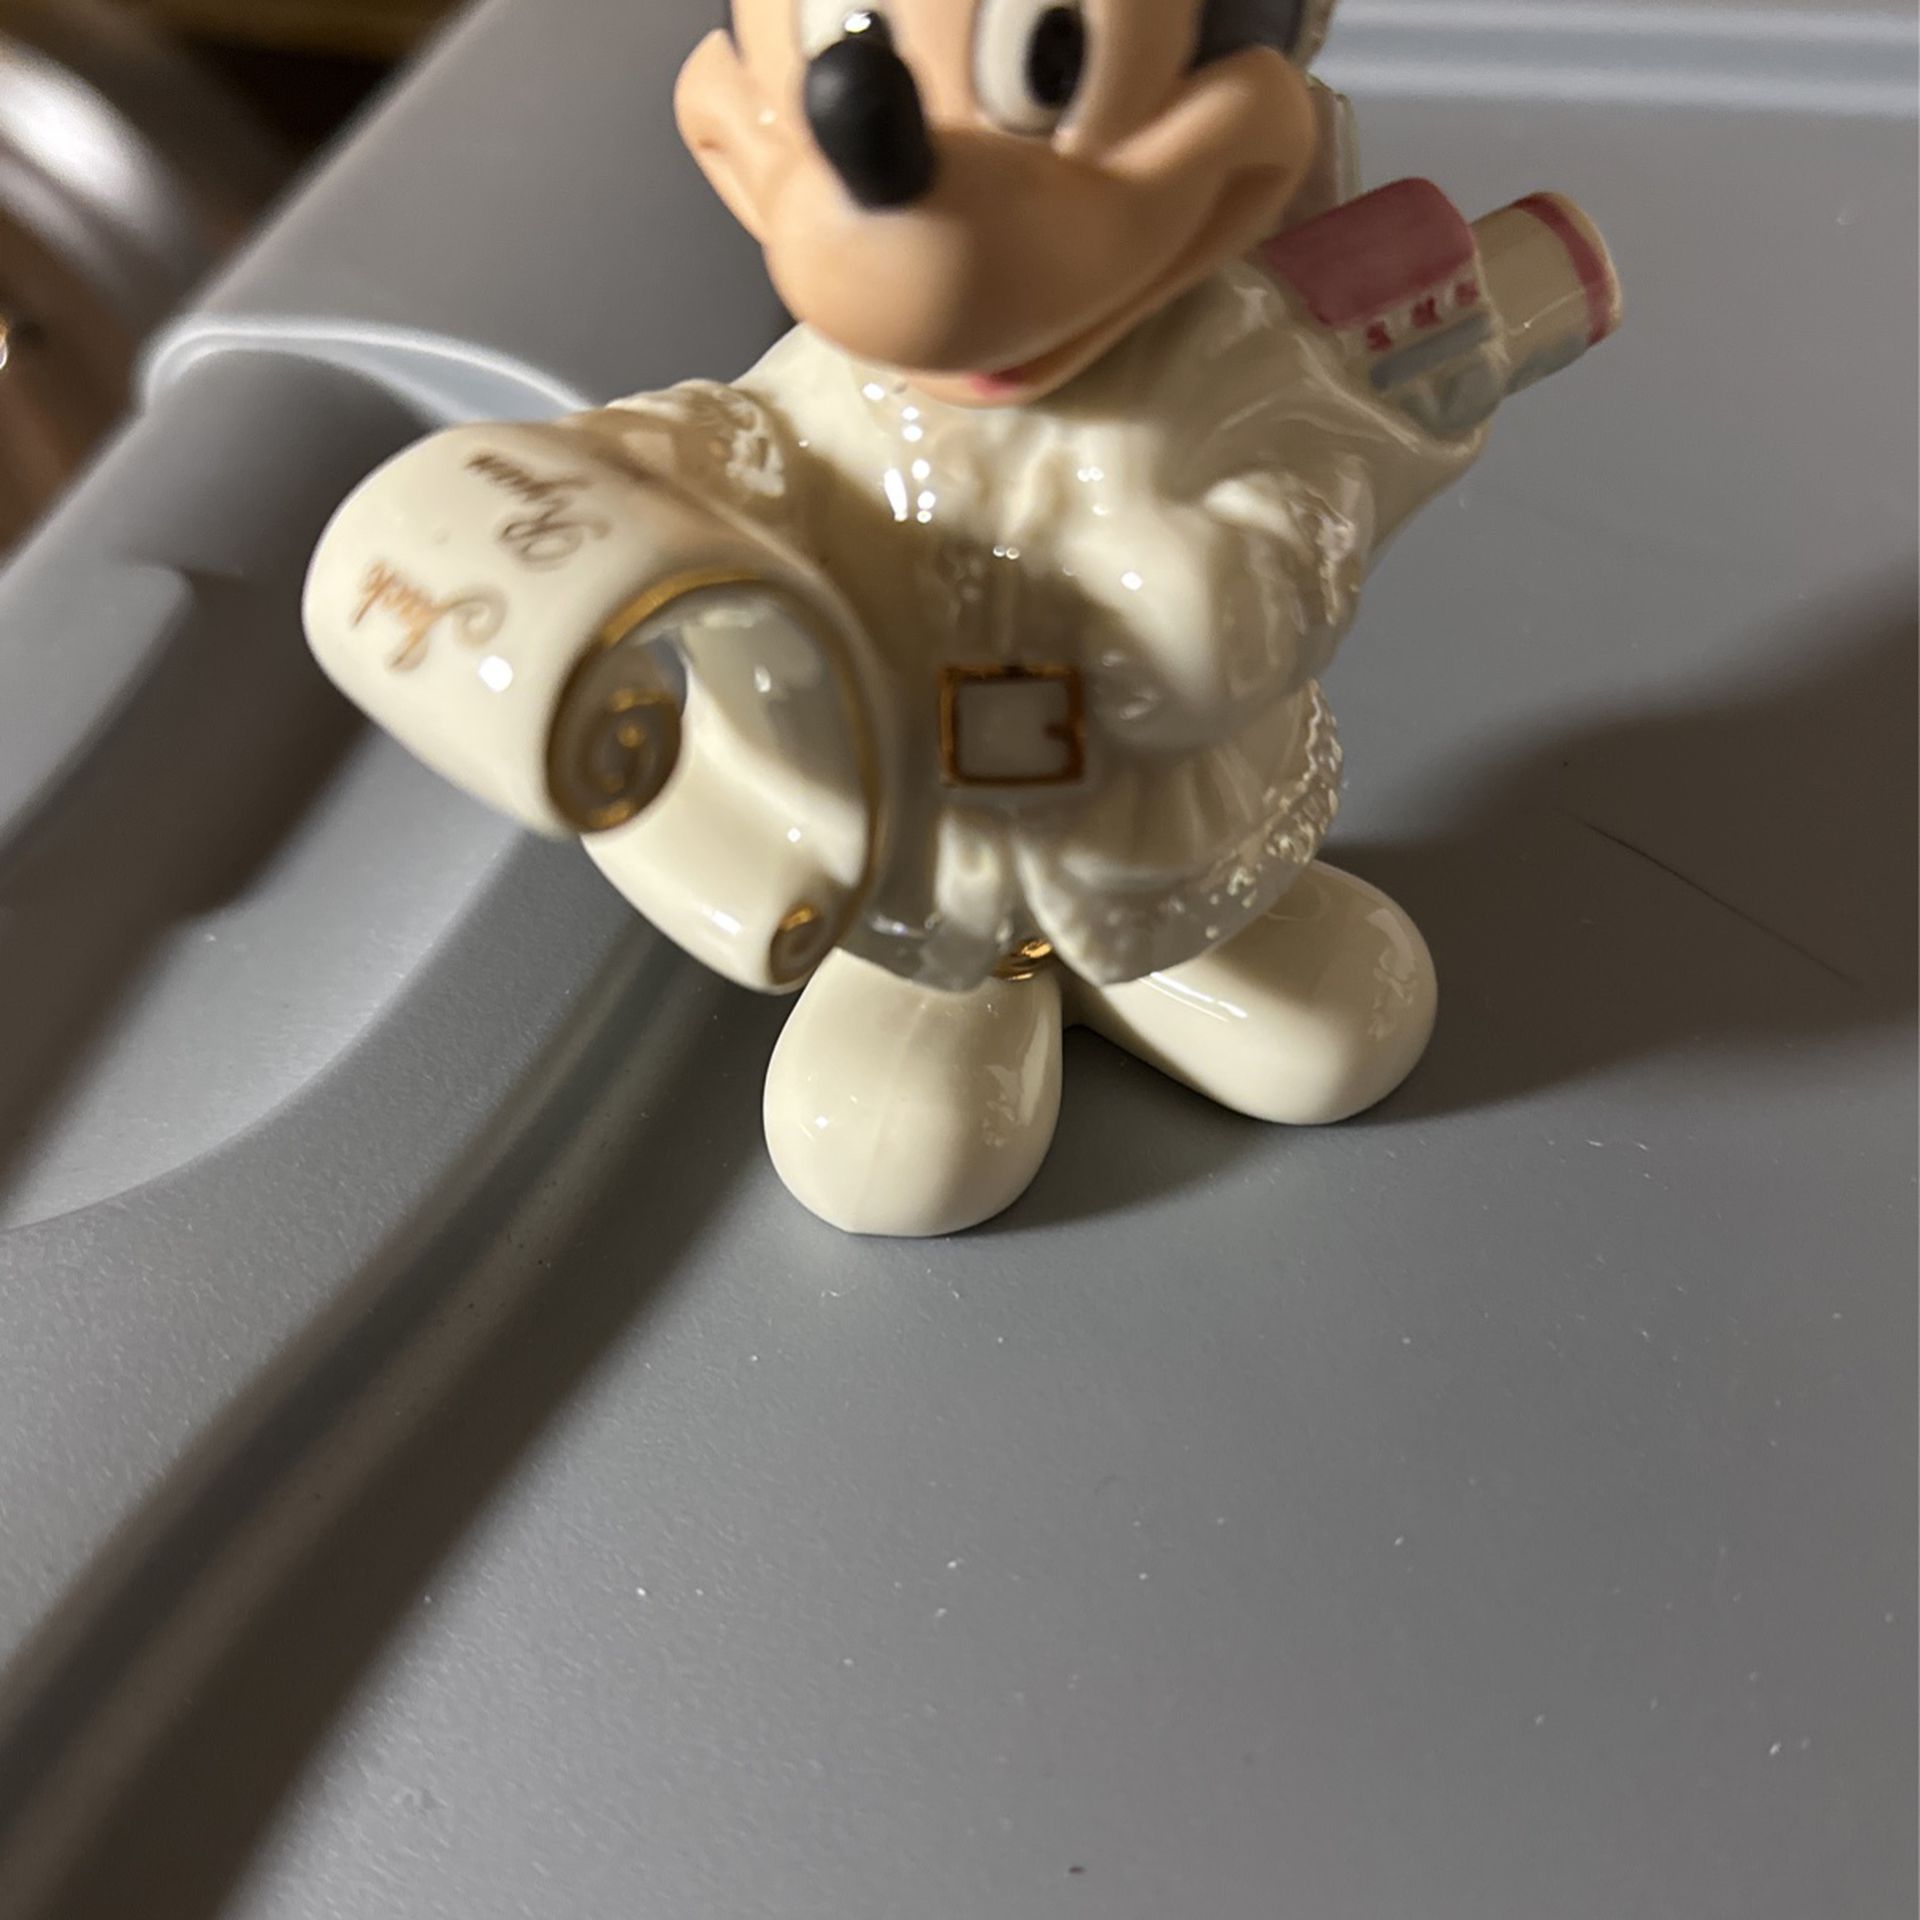 4 Porcelain Mickey Mouse Christmas Ornaments 